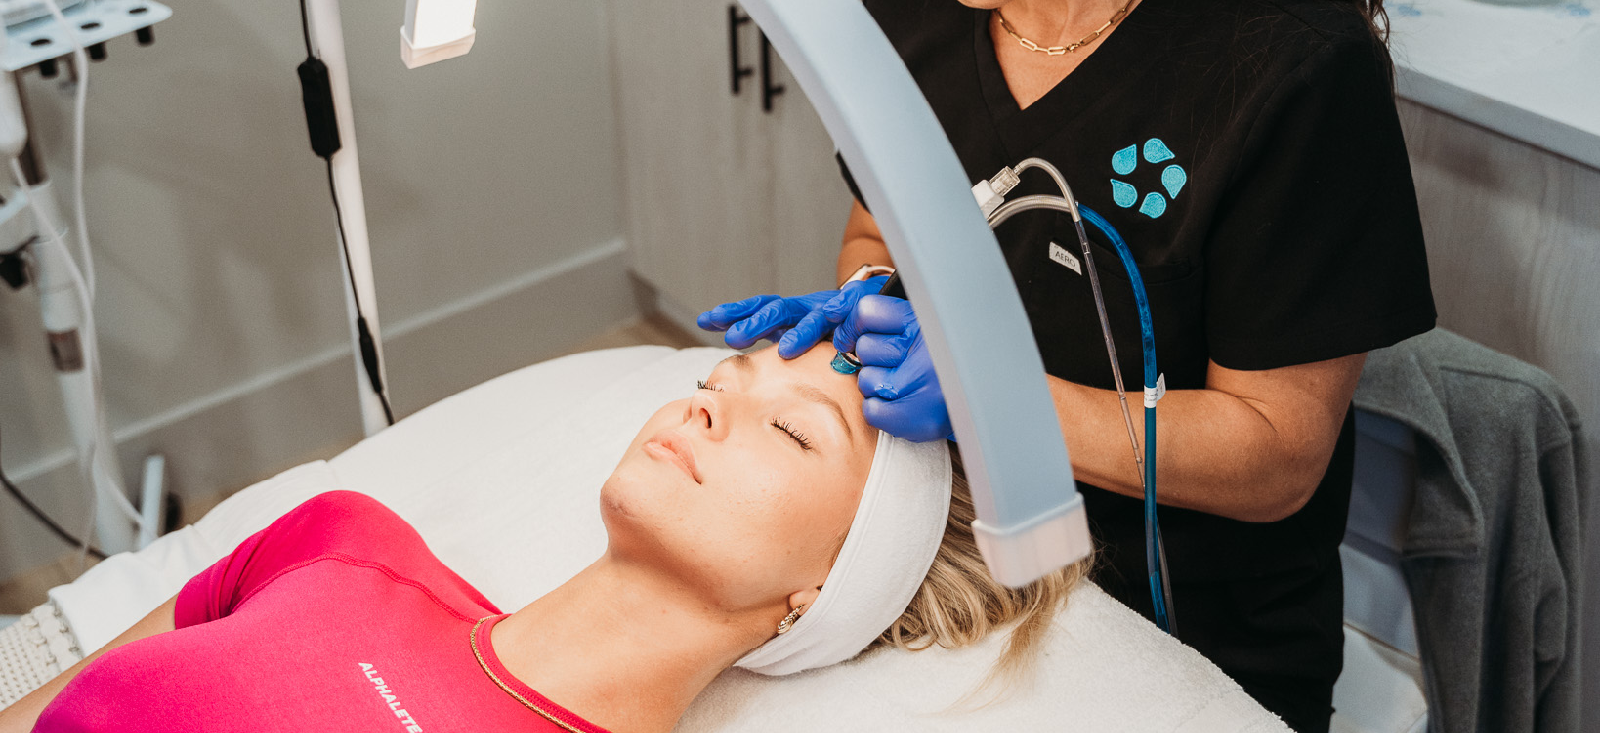 relive health hendersonville medspa employee administering Hydrafacial treatment to patient 1600x733 1